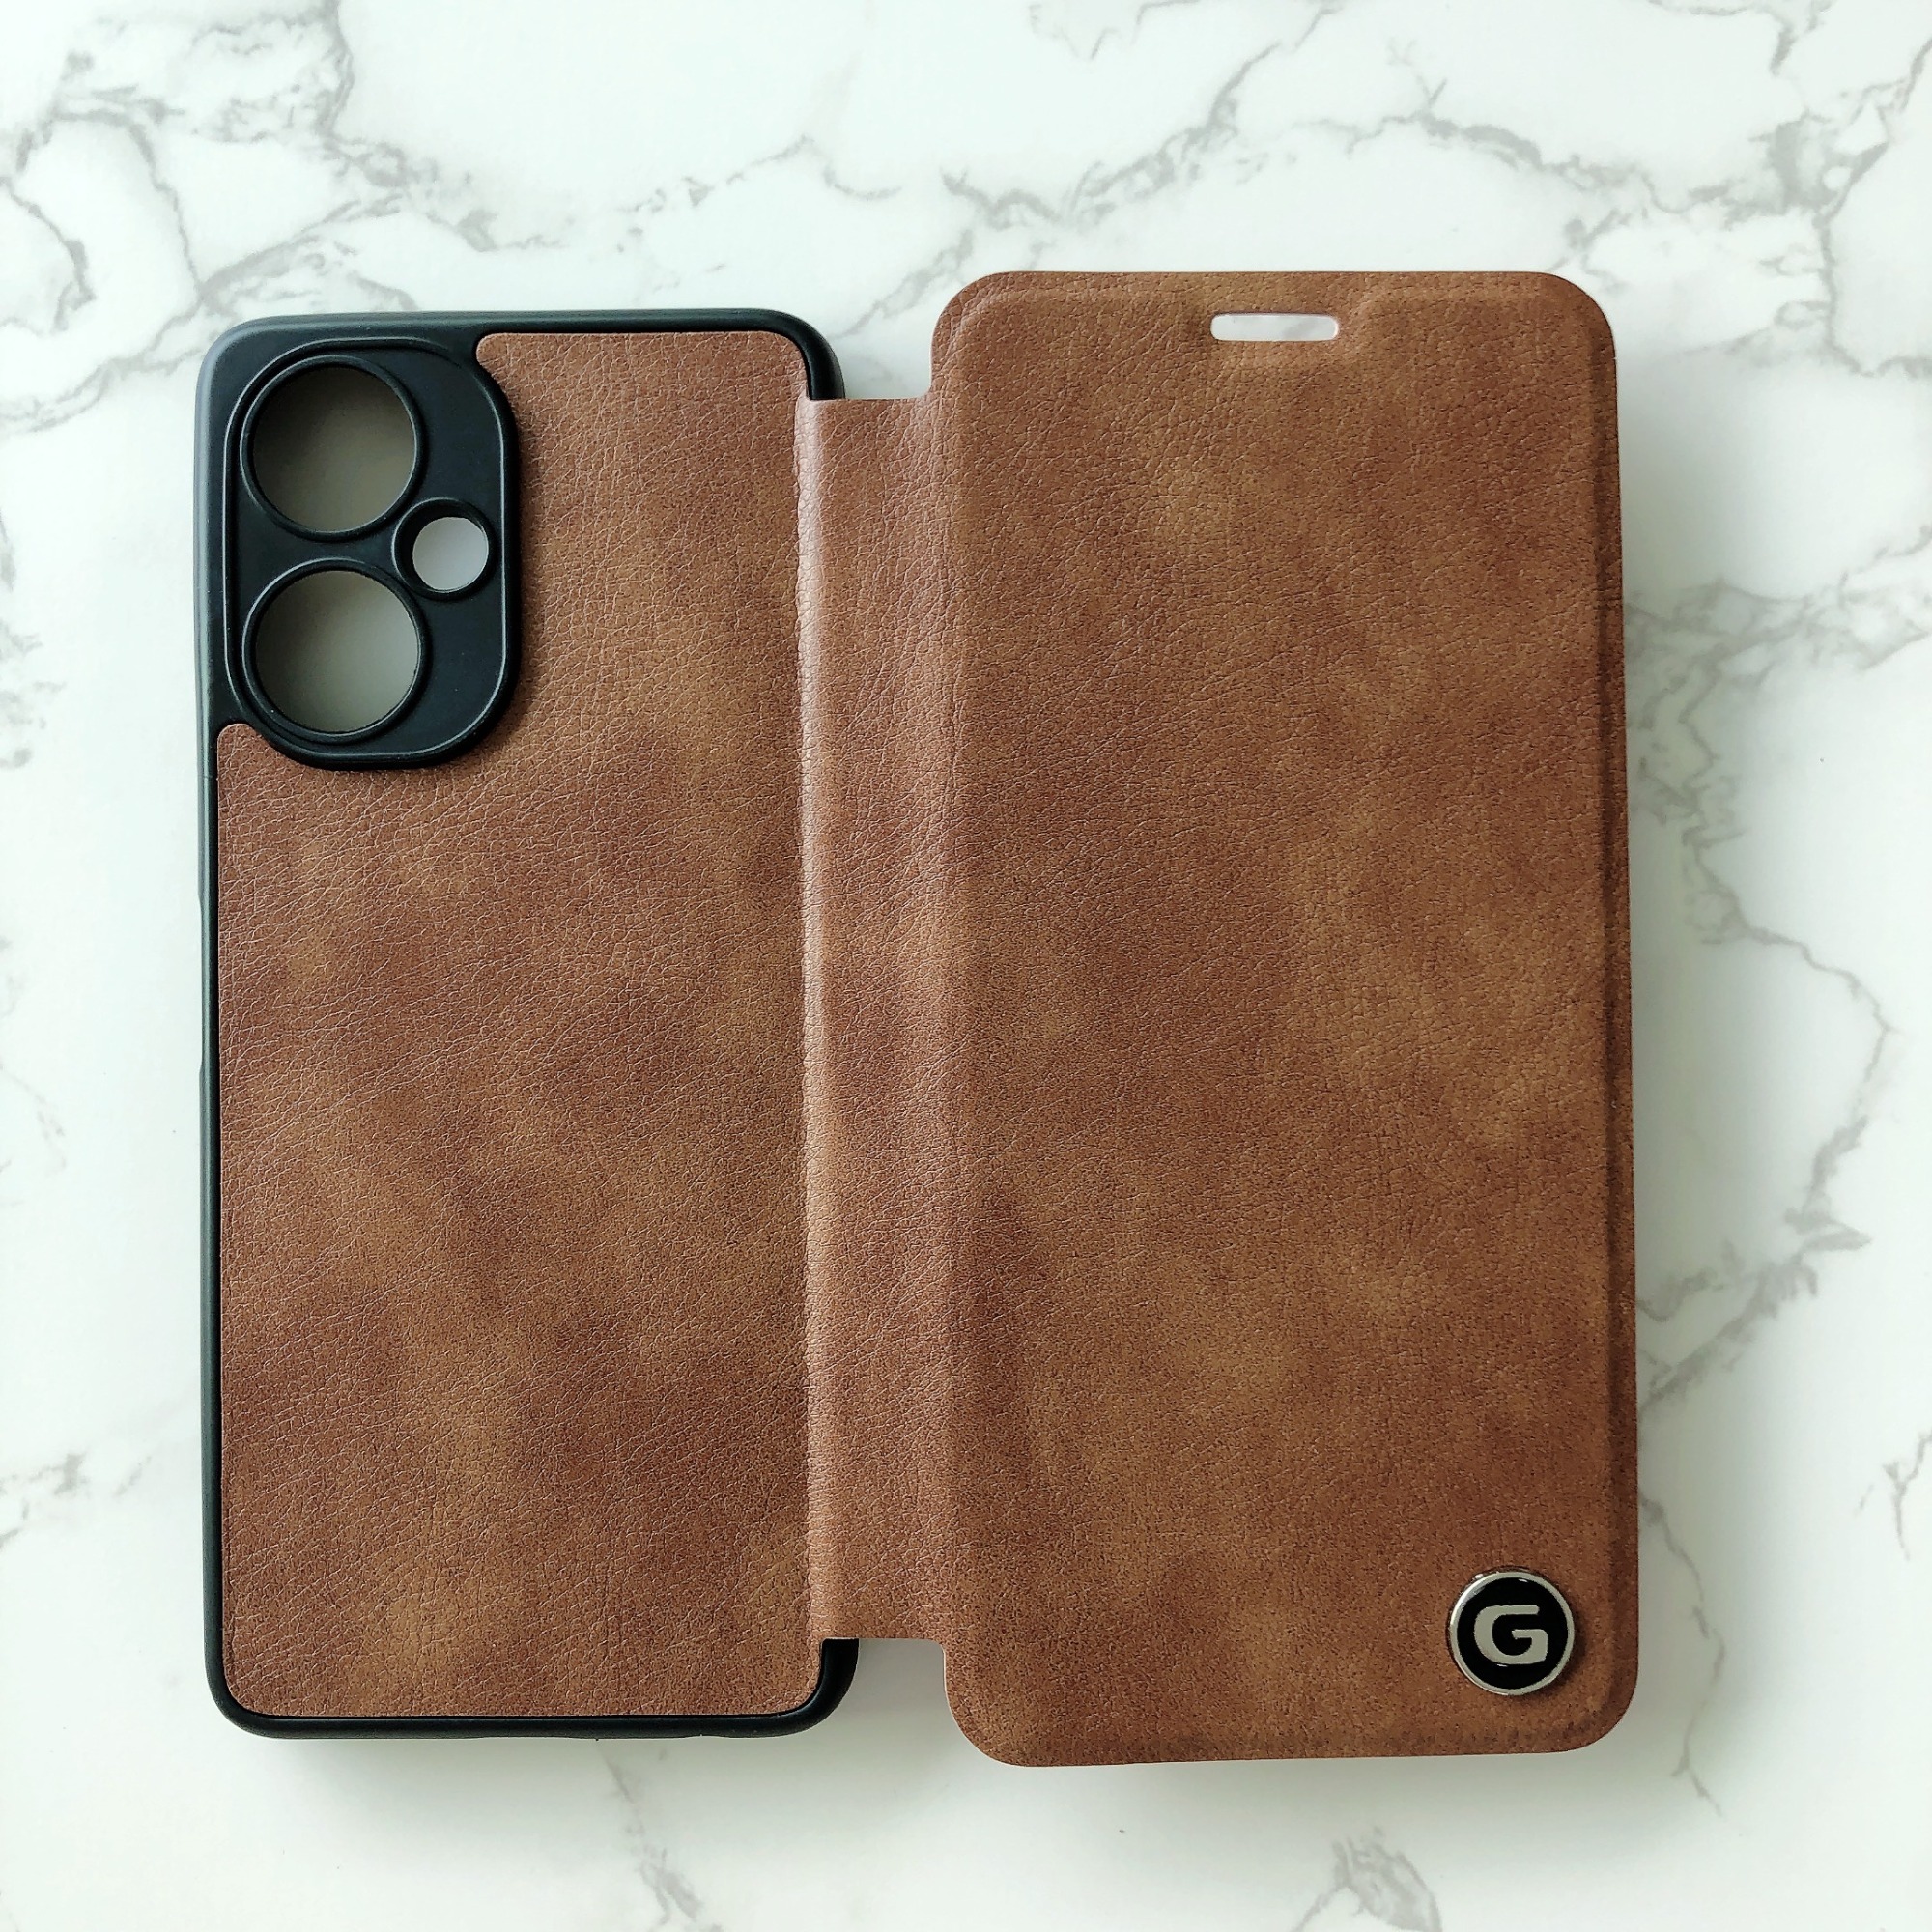 Skillful manufacture Leather filp cover with G logo suitable for NK C31 phone case